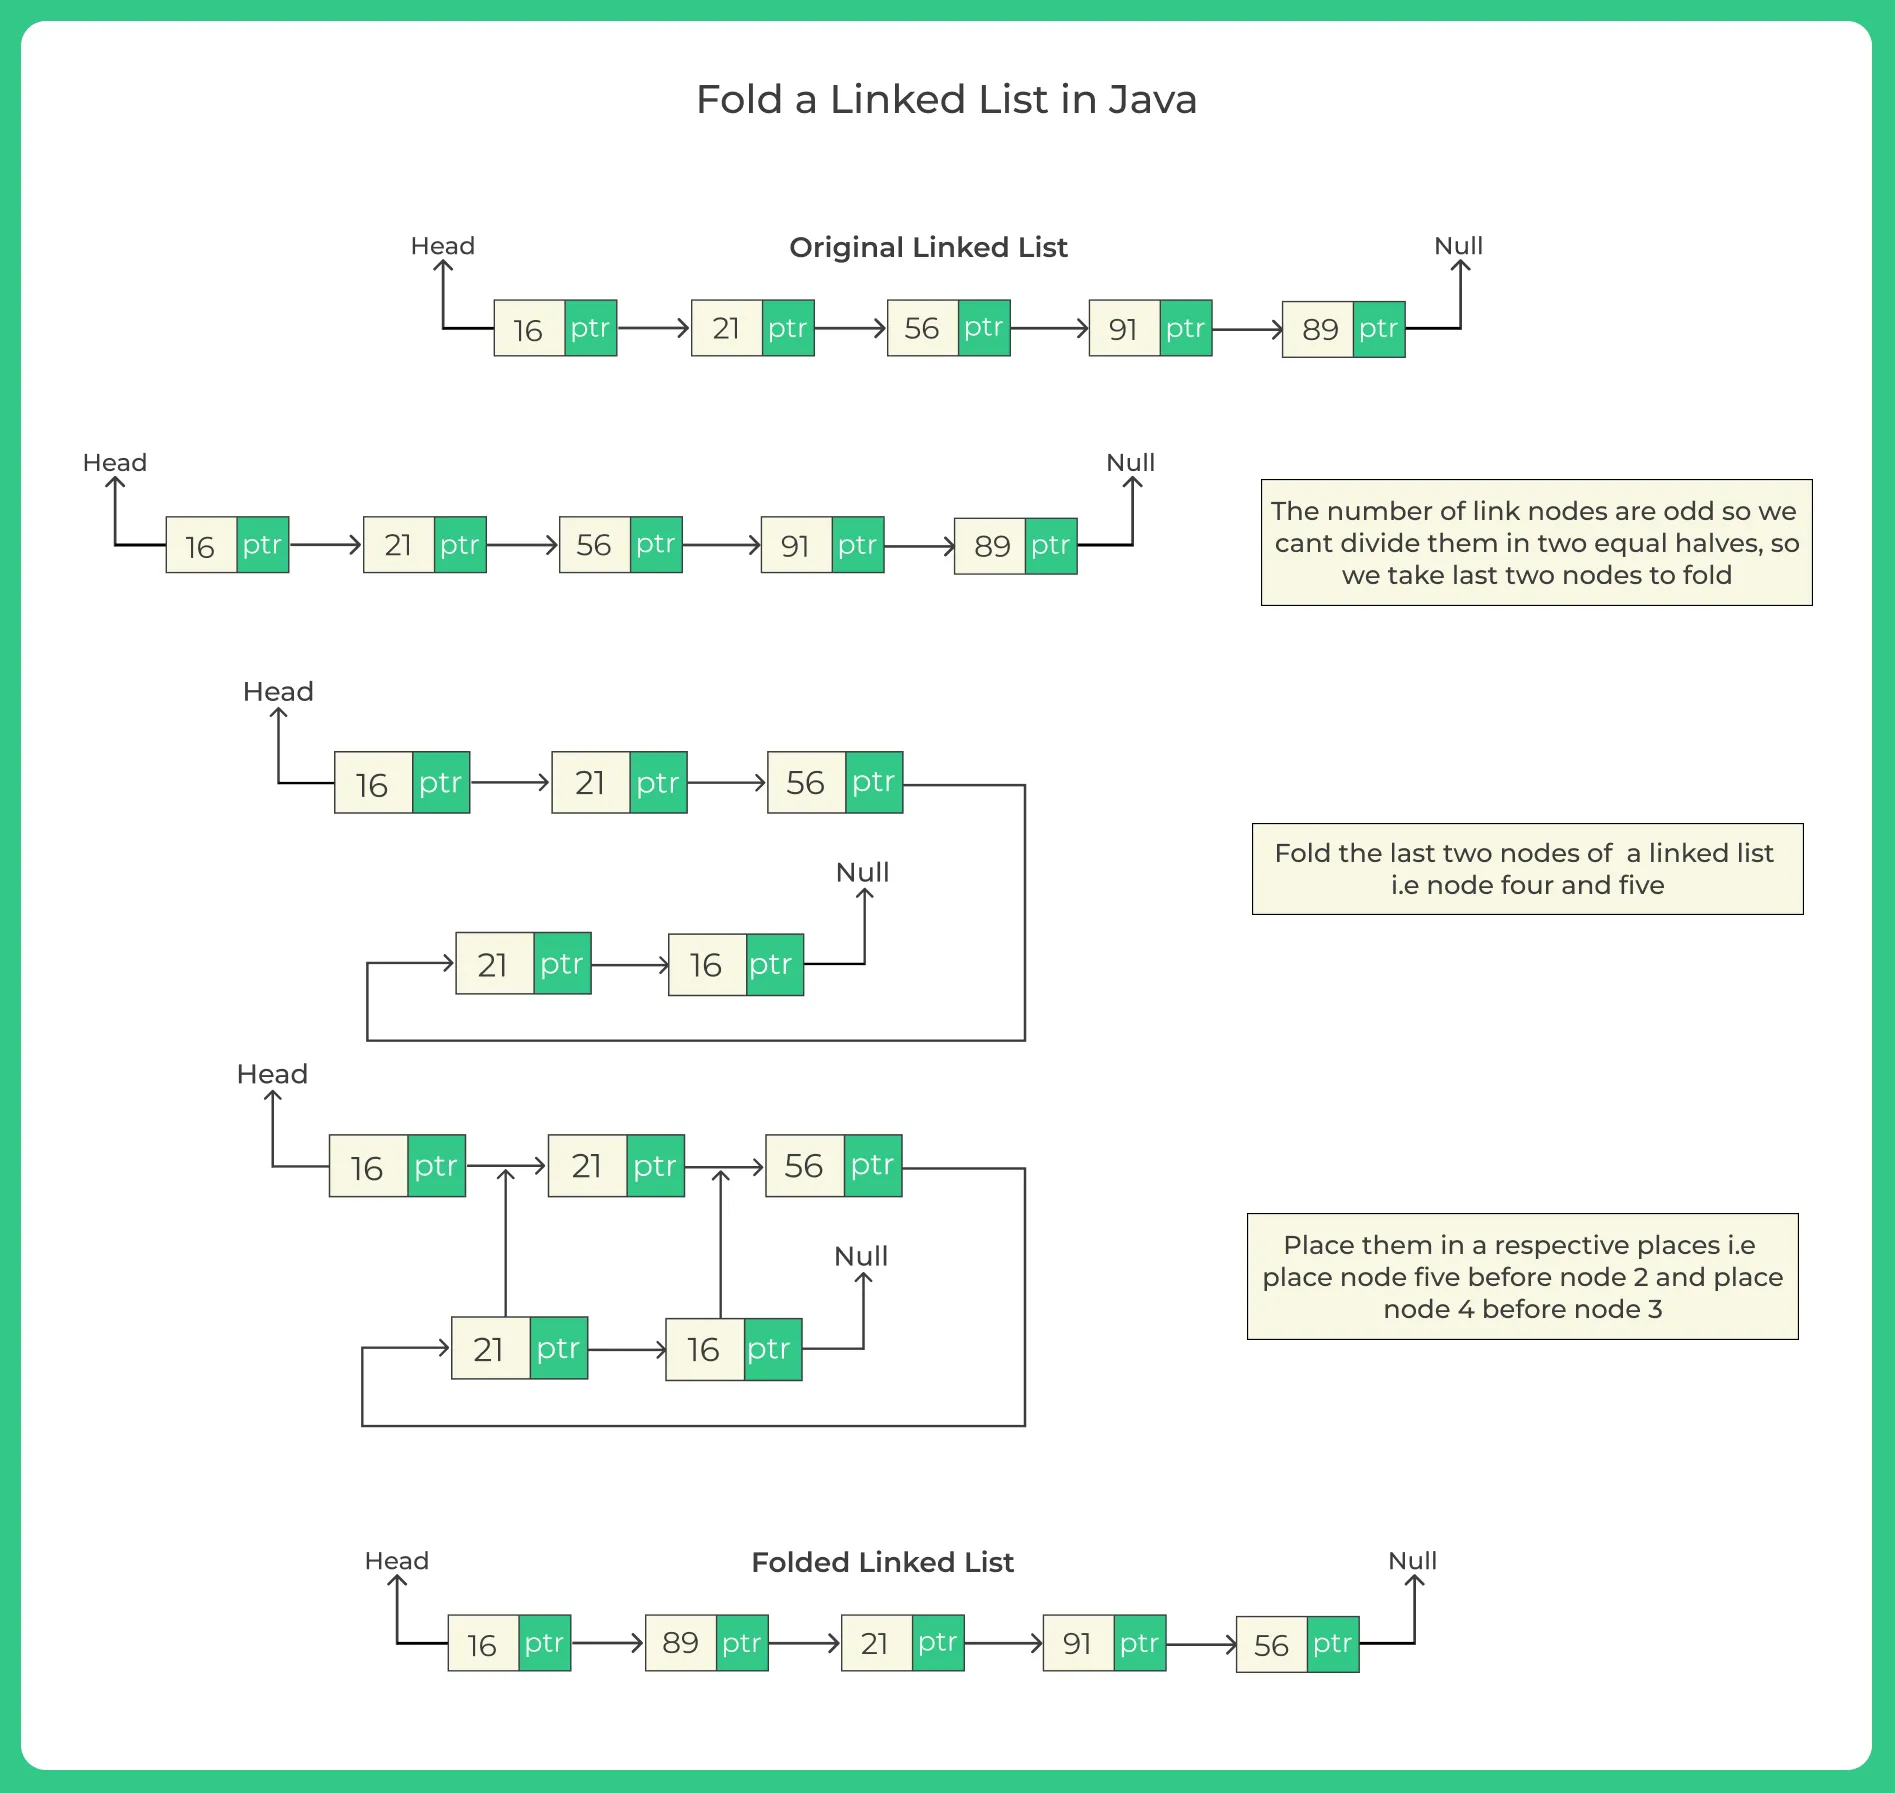 Fold a Linked List in Java